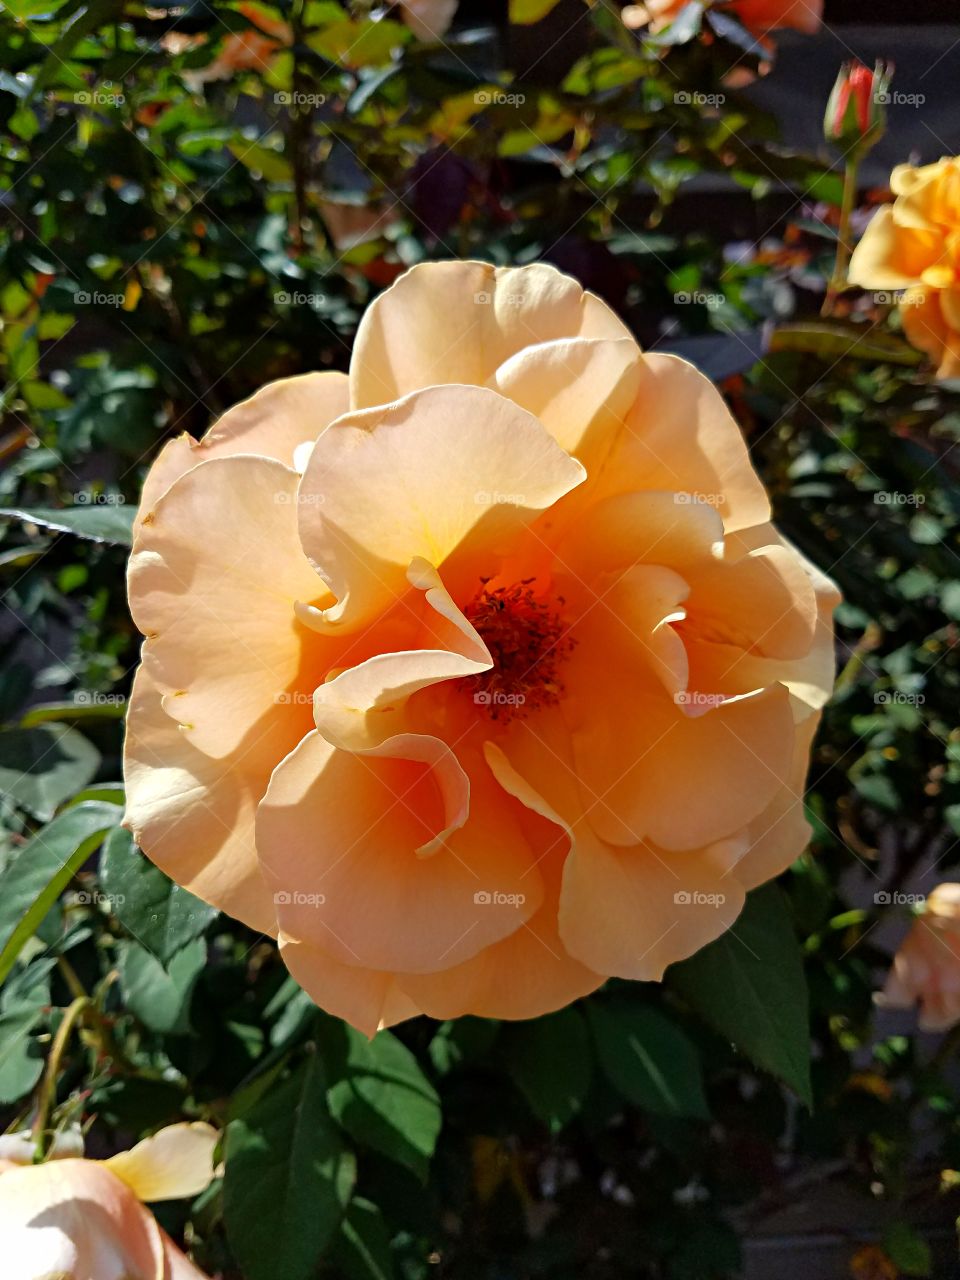 Sun Drenched Rose in full bloom!